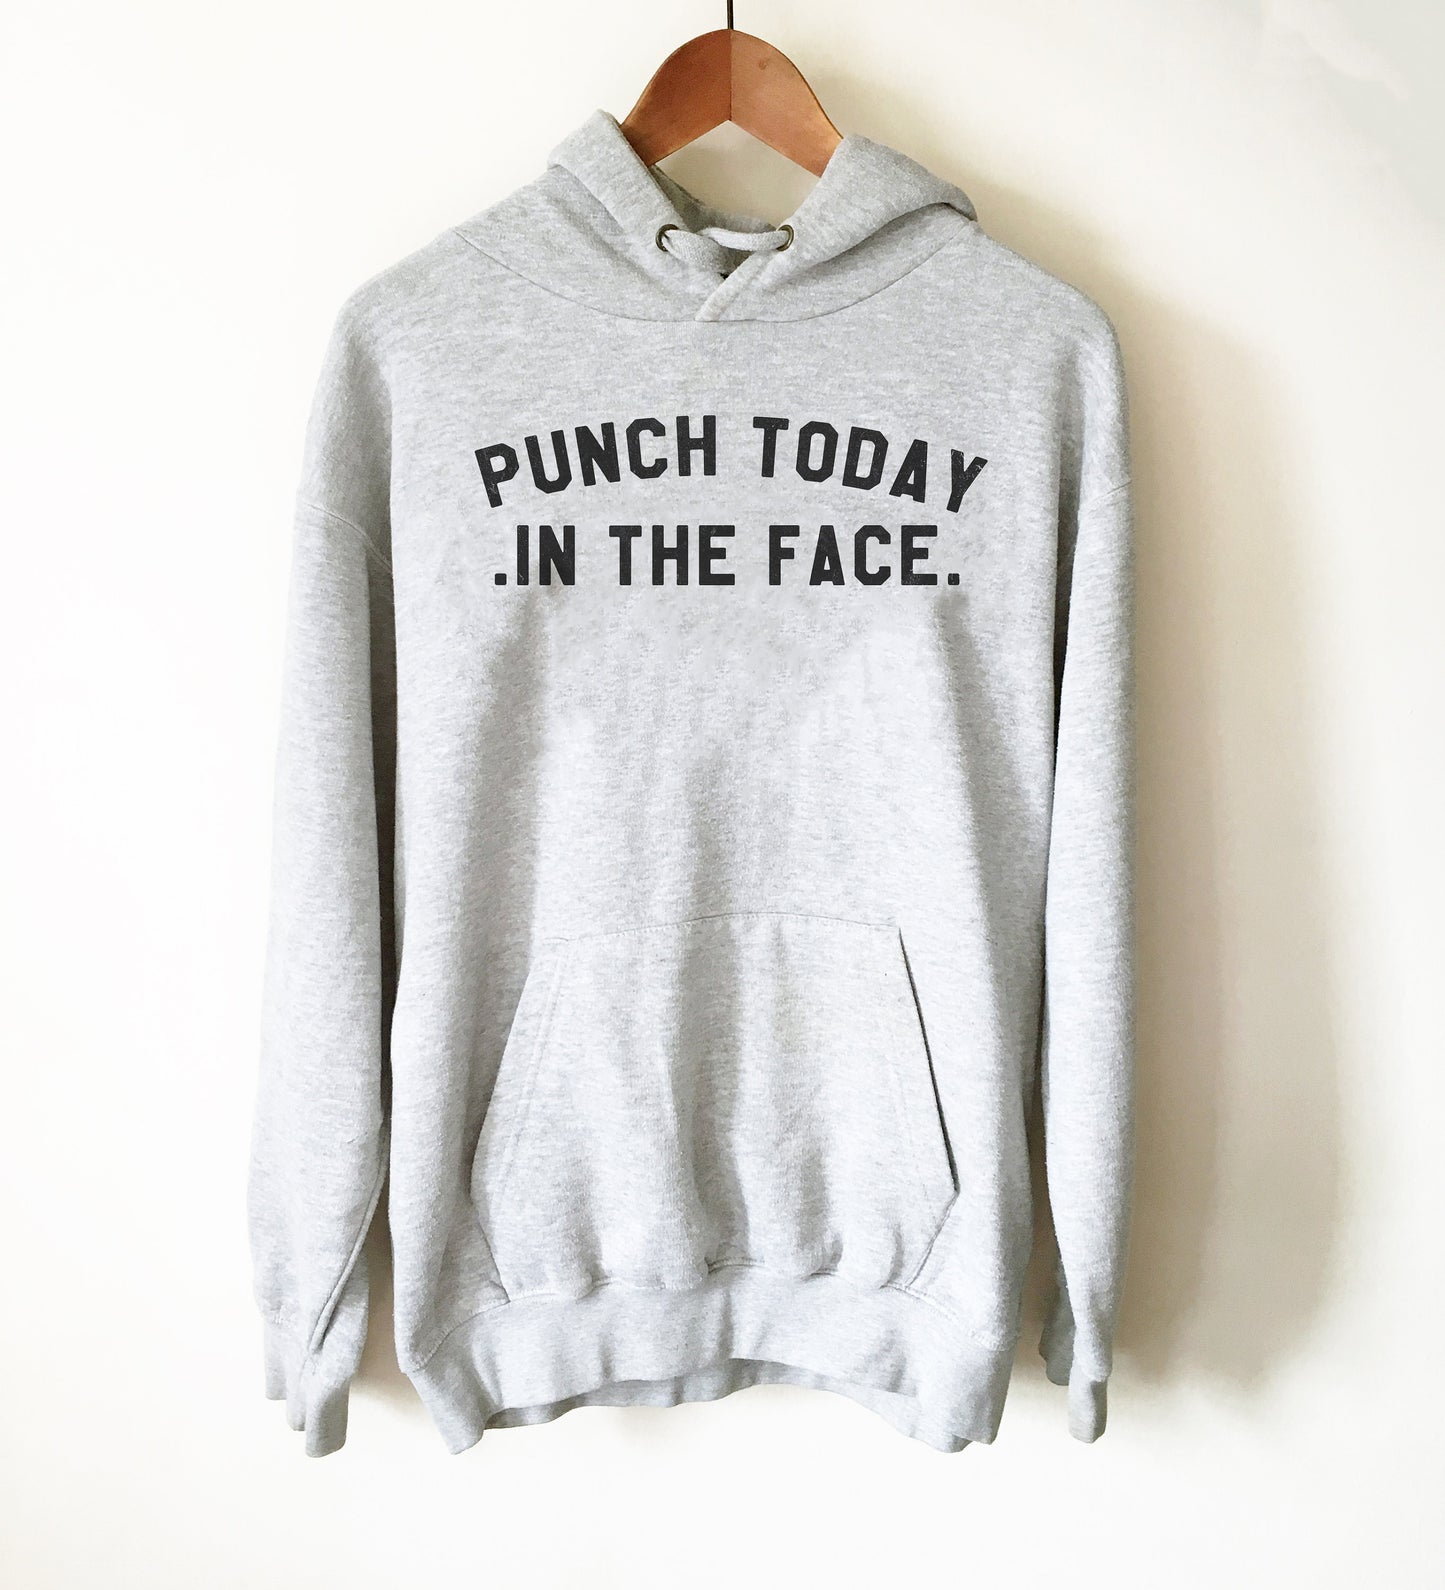 Punch Today In The Face Hoodie - Tumblr Shirt, Instagram Shirt, Punch Today, Sassy Shirt, Sassy Gift, Mean Shirt,